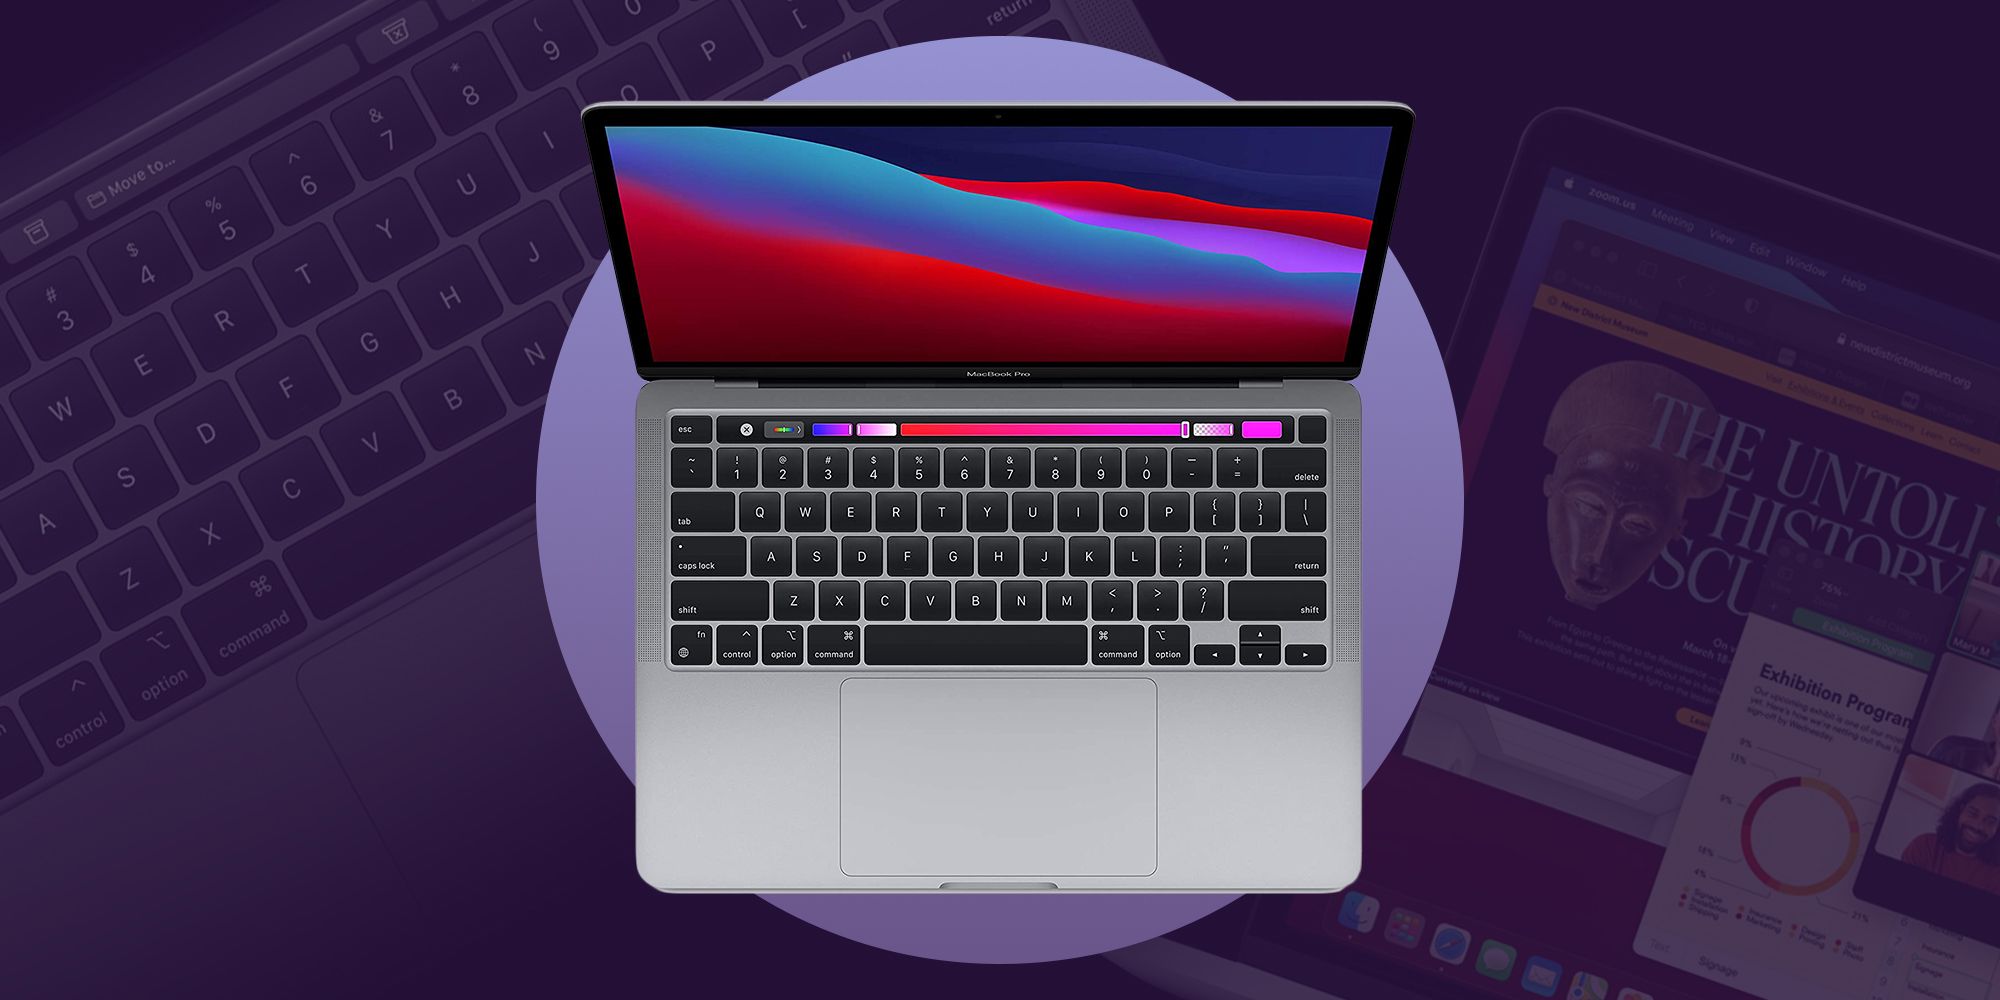 Apple MacBook Pro 13-Inch (2020) Review: Next-Level Performance